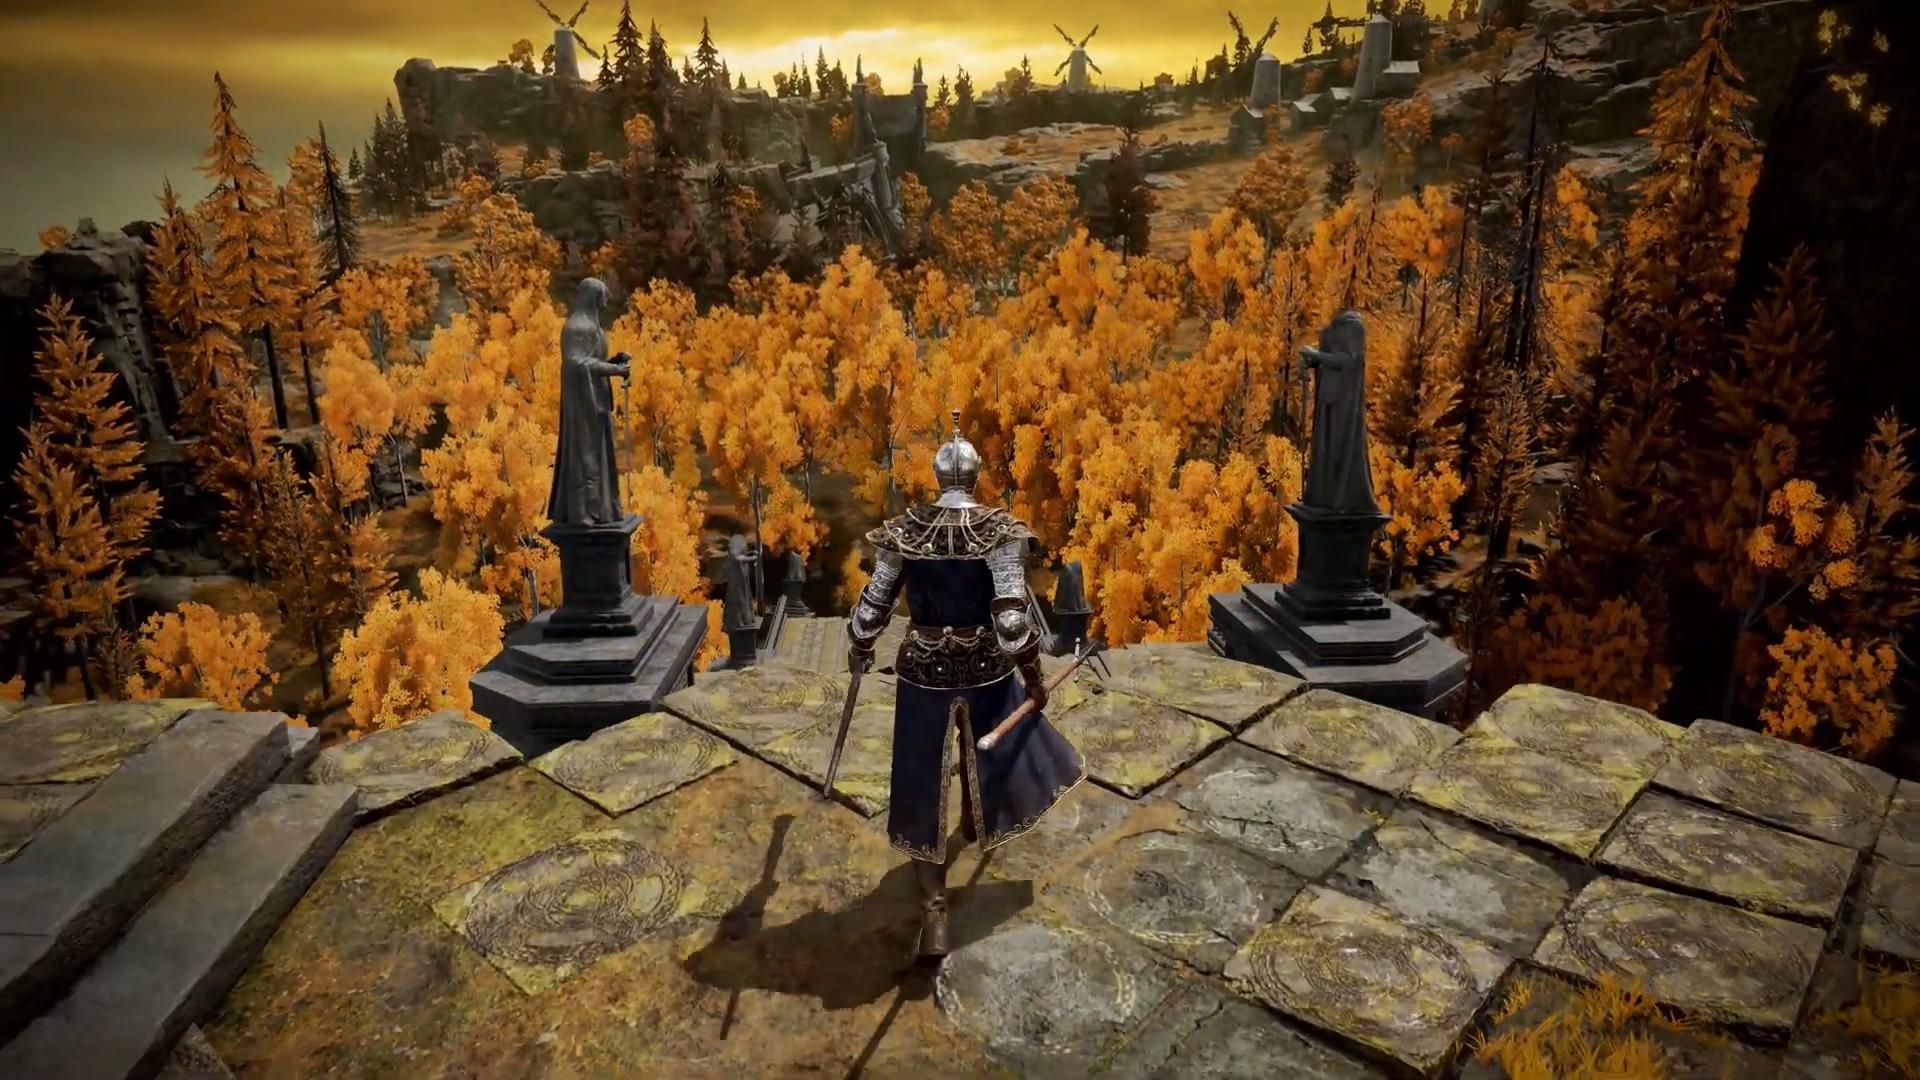 Elden Ring gameplay preview video - A player walks up to the edge of a ruin, looking down on a forest of bright orange trees.